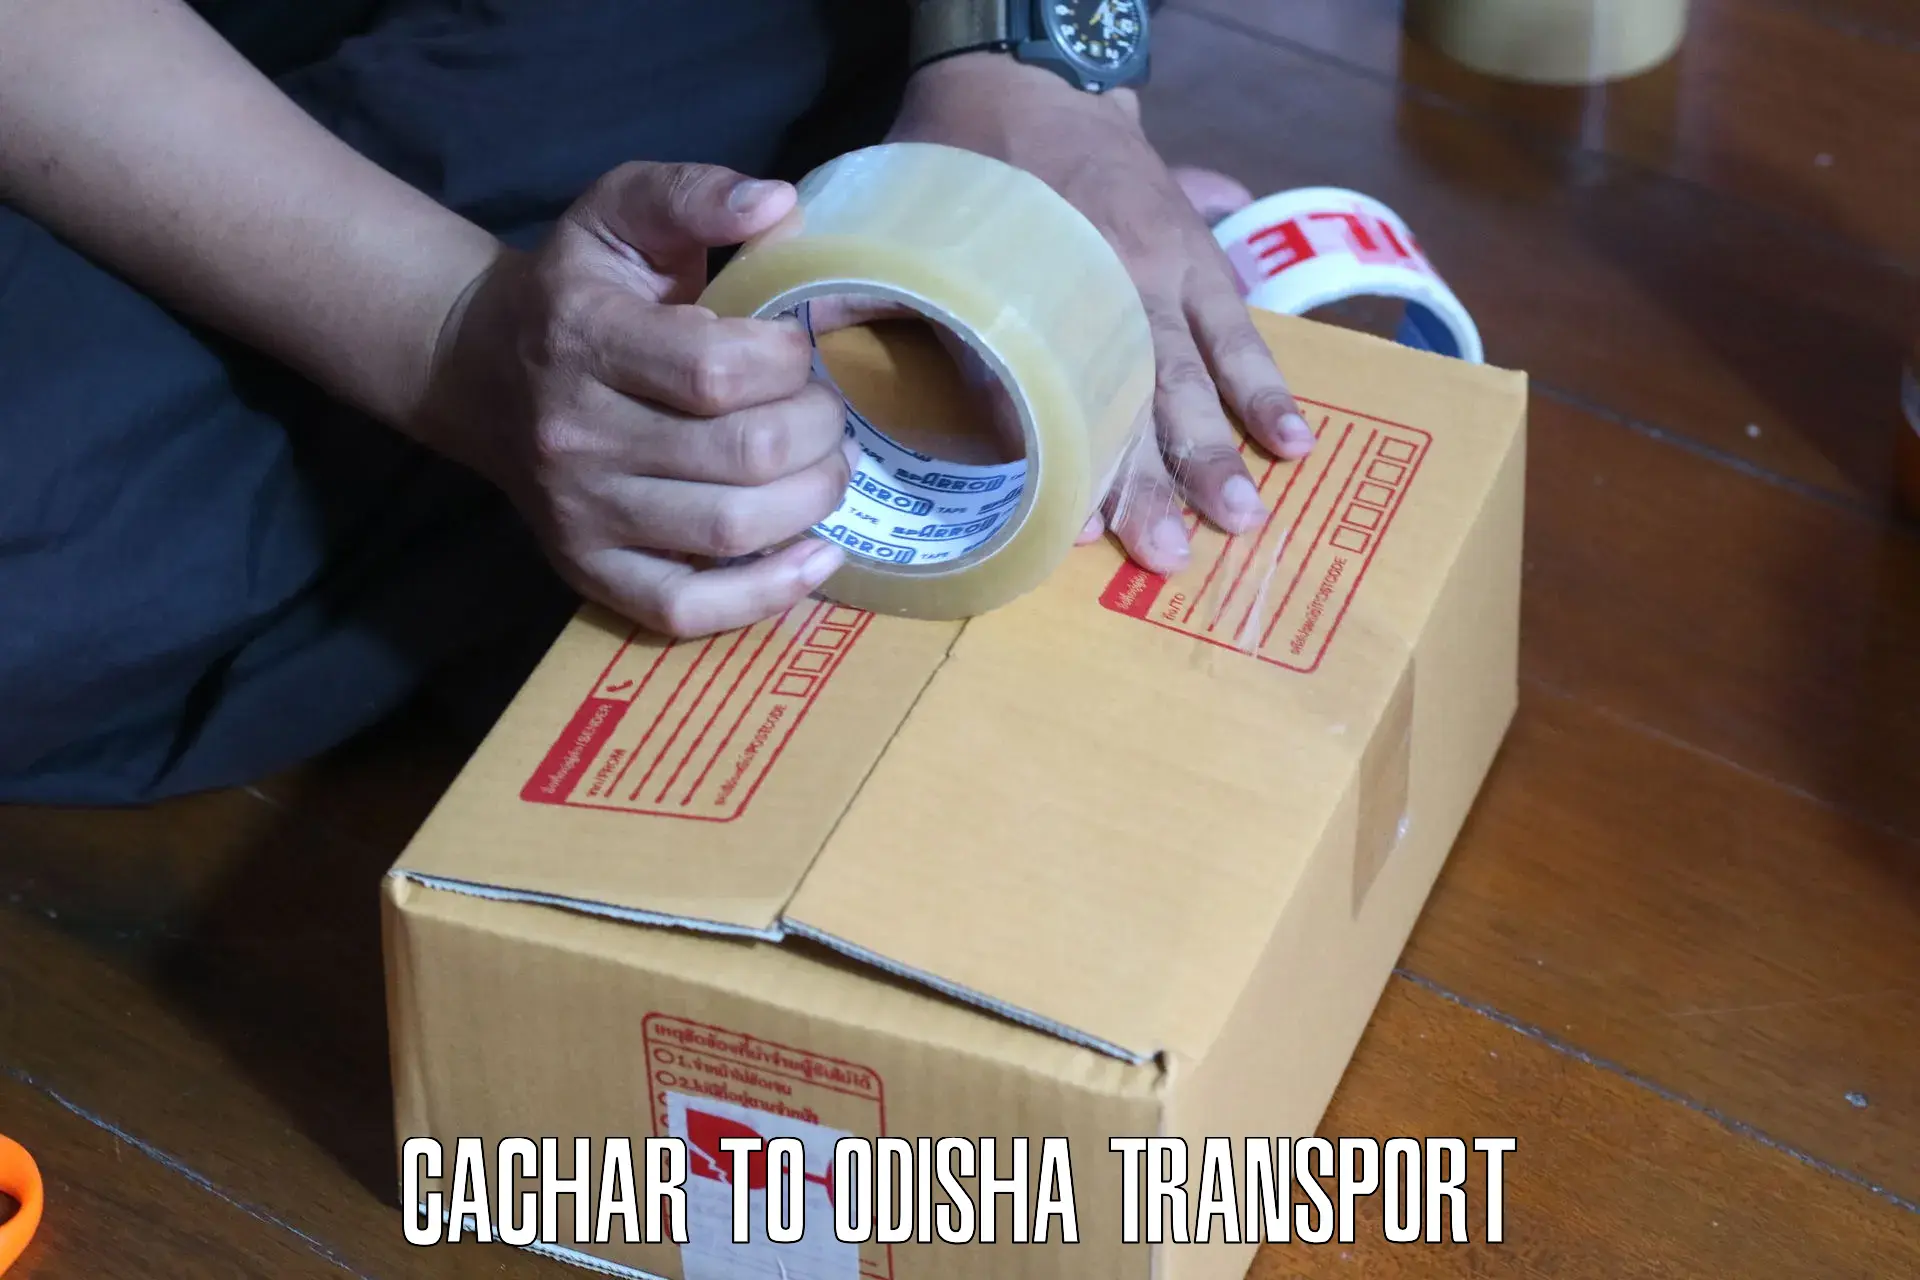 Commercial transport service Cachar to Birmitrapur